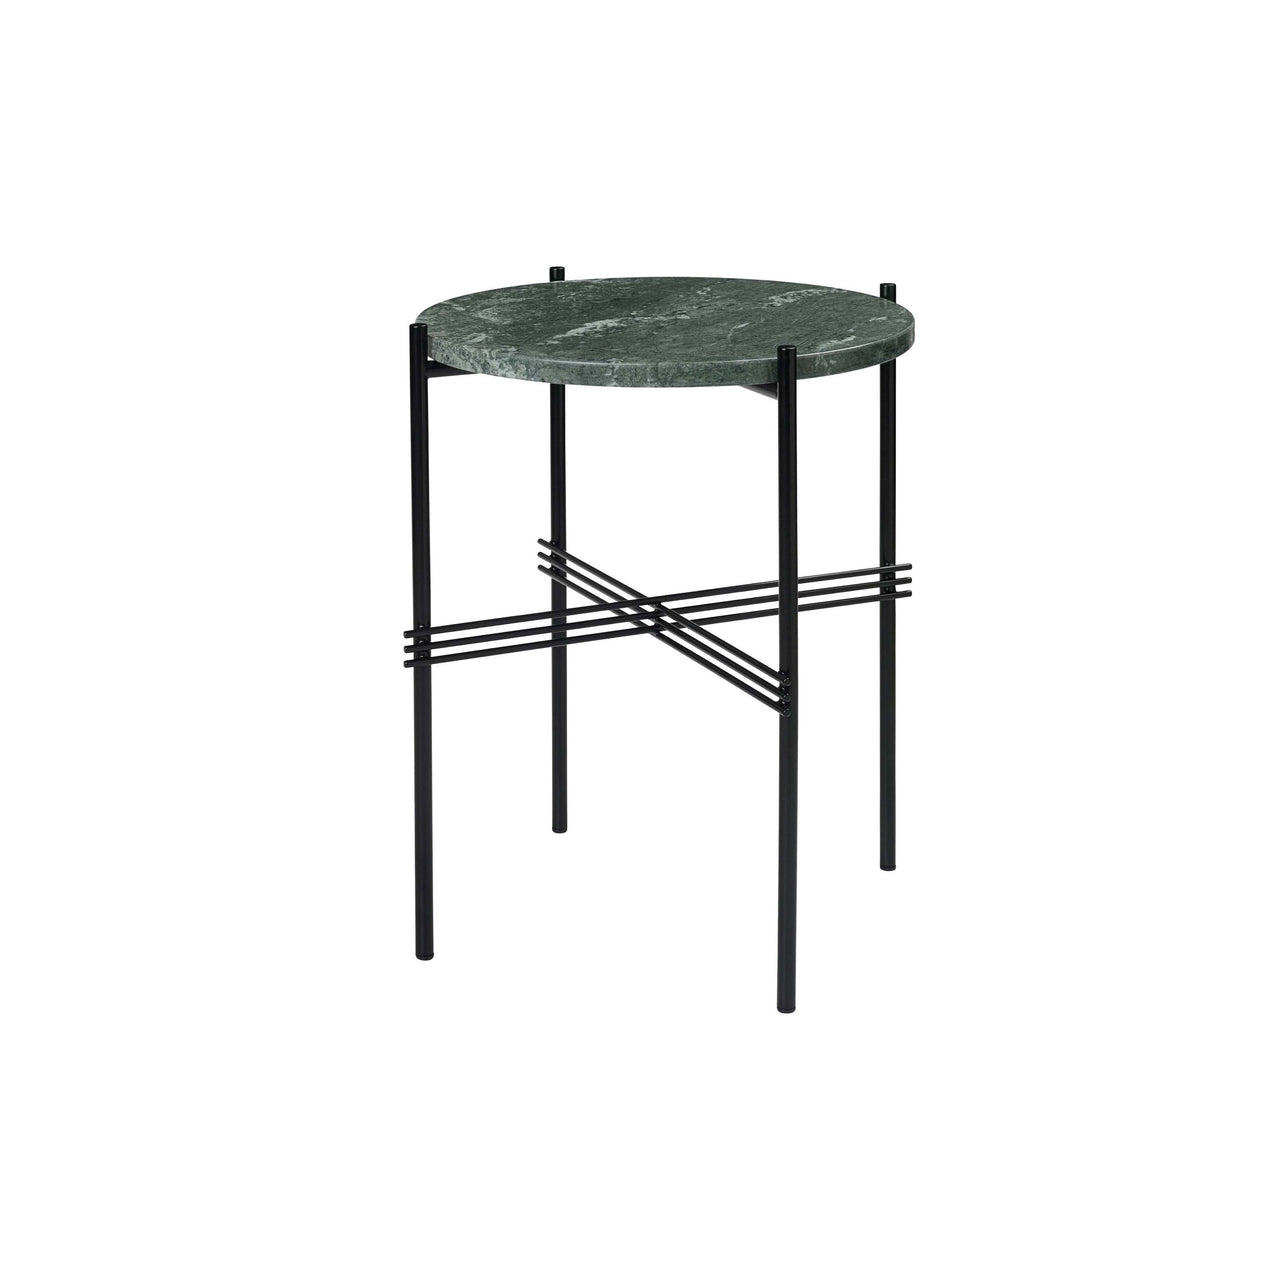 TS Round Side Table: Black + Green Guatemala Marble